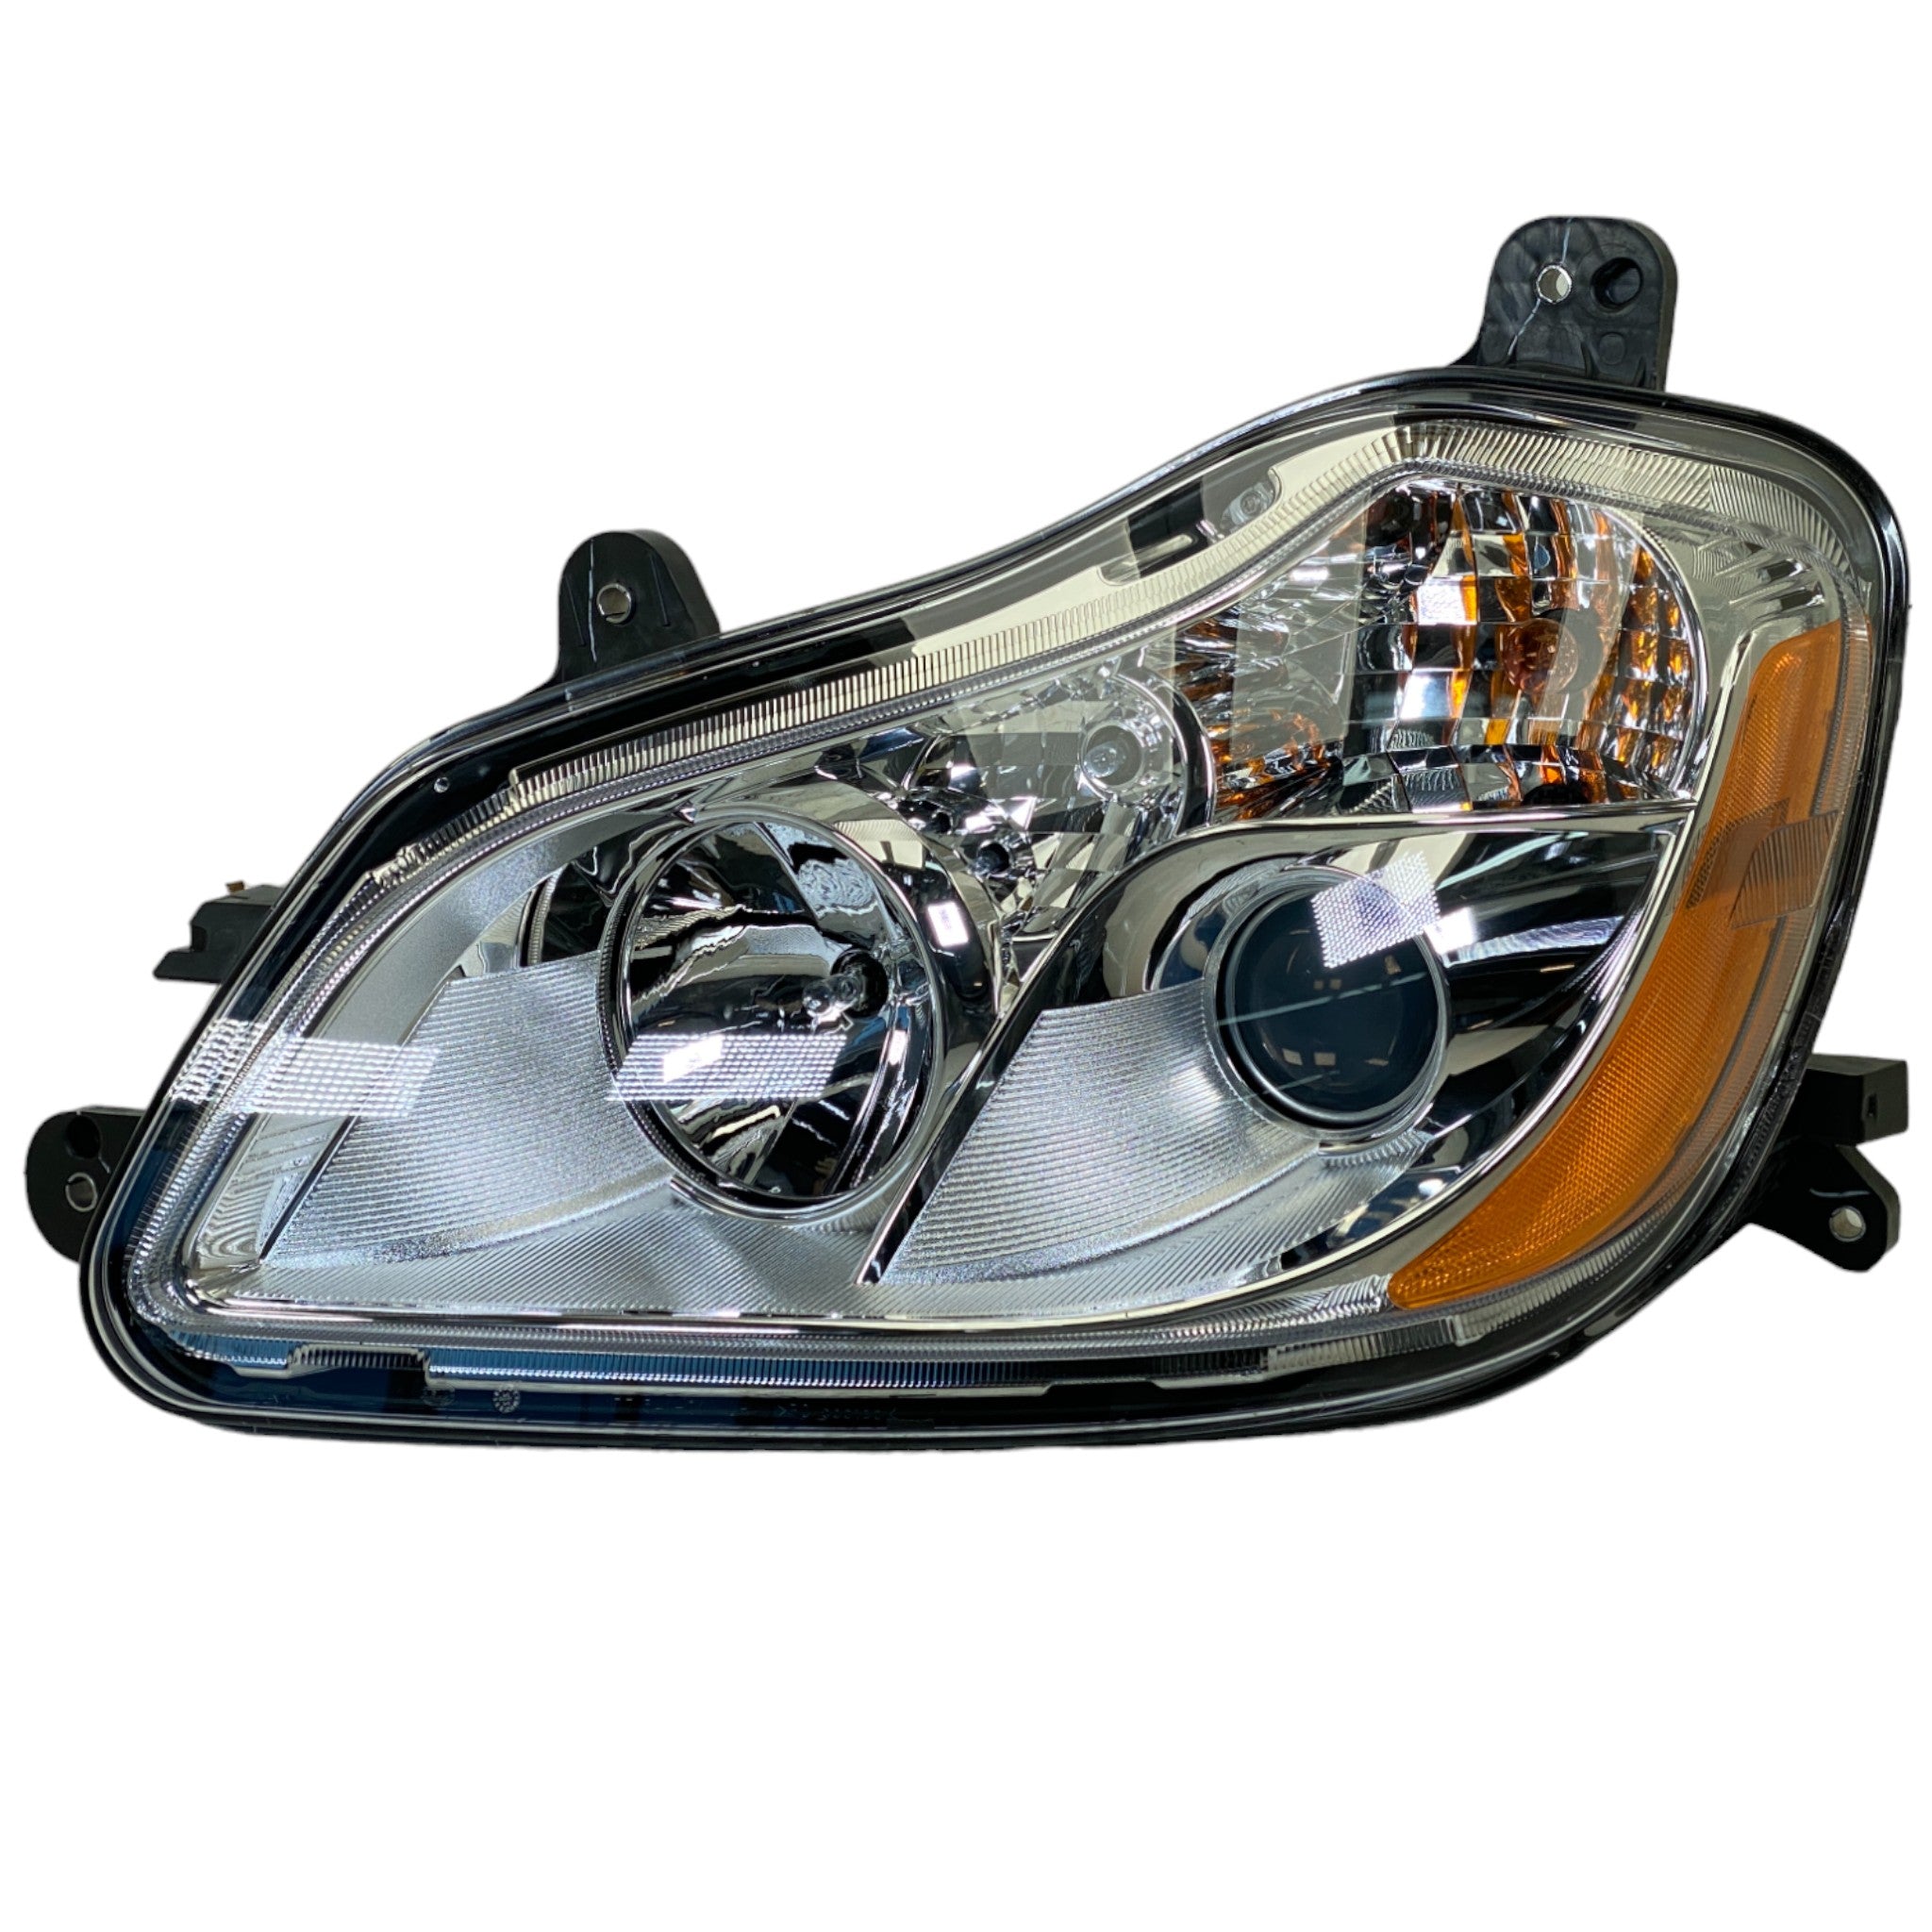 P54-6103-10000 Paccar® Left Side Halogen Headlight Assy For Kenworth T680 2013-2021